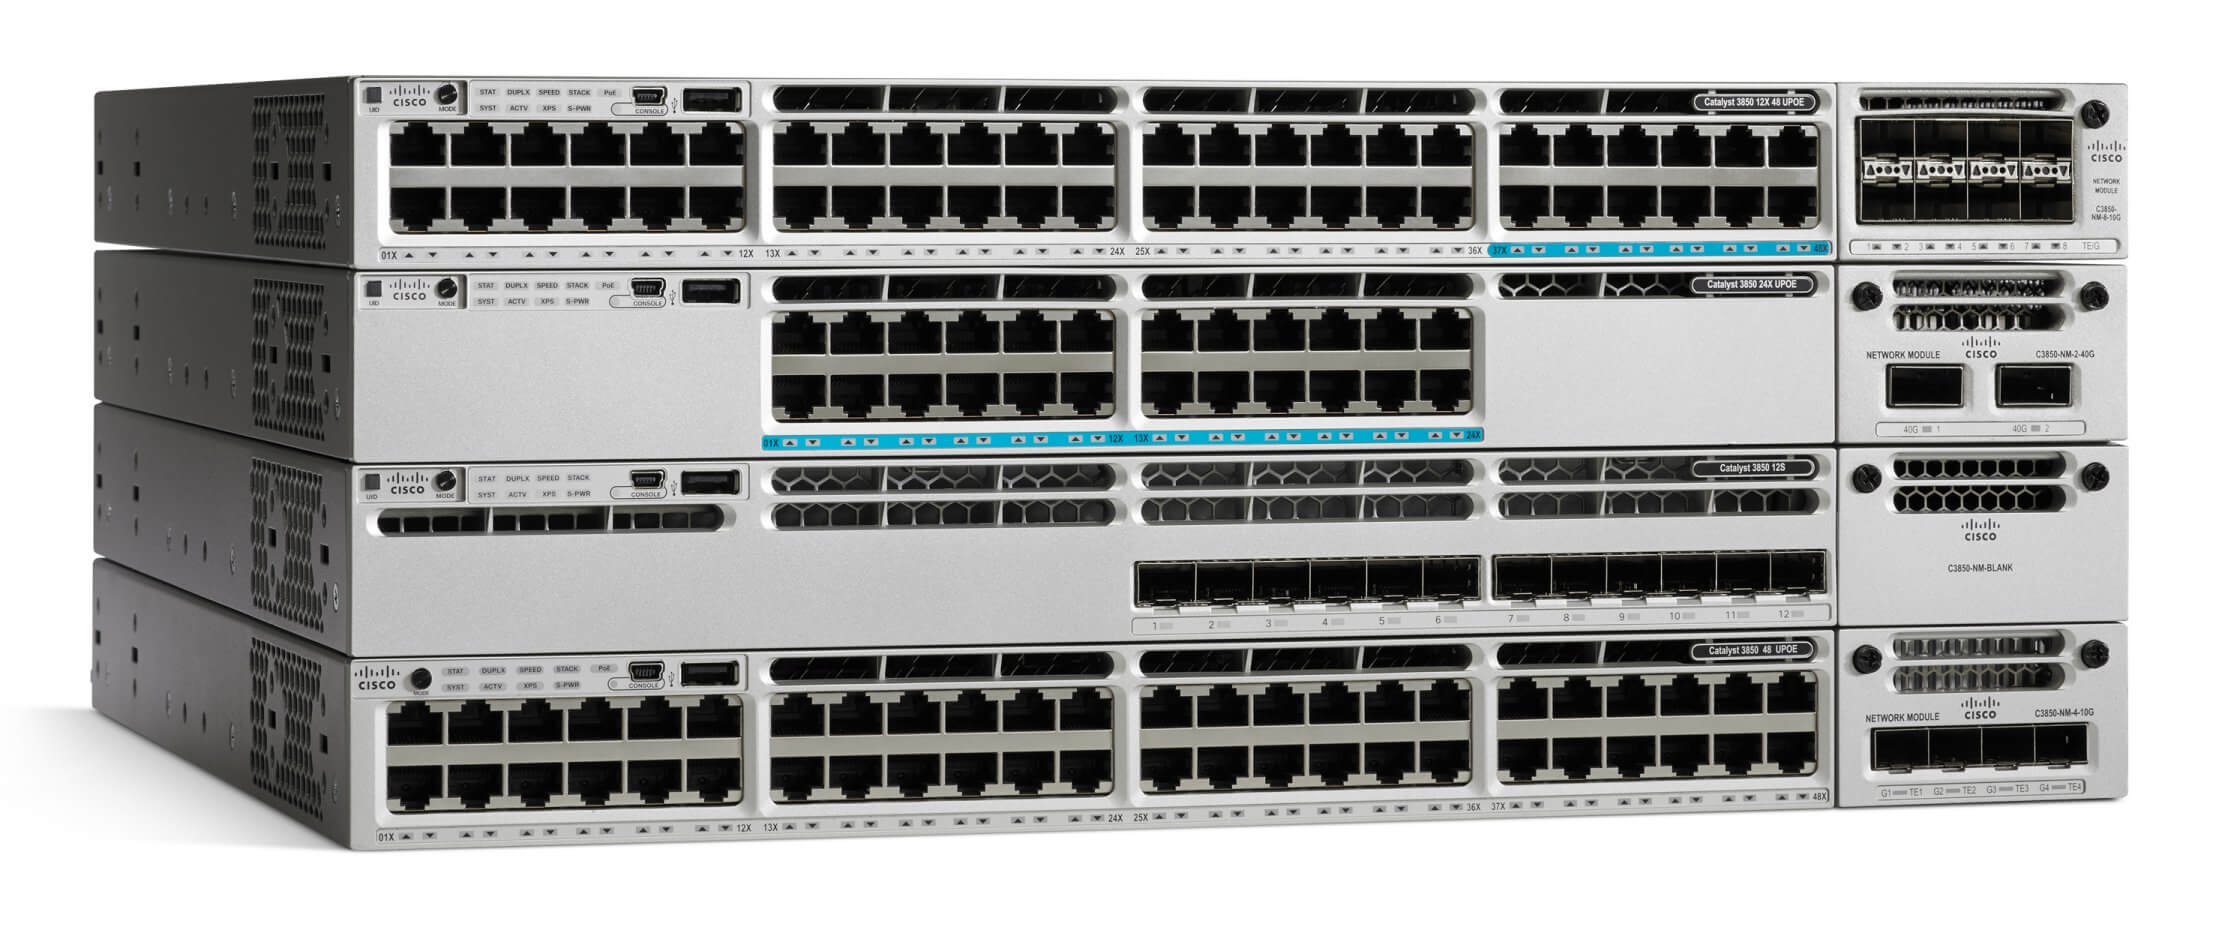 Product photo of Cisco Catalyst 3850 Series Switches